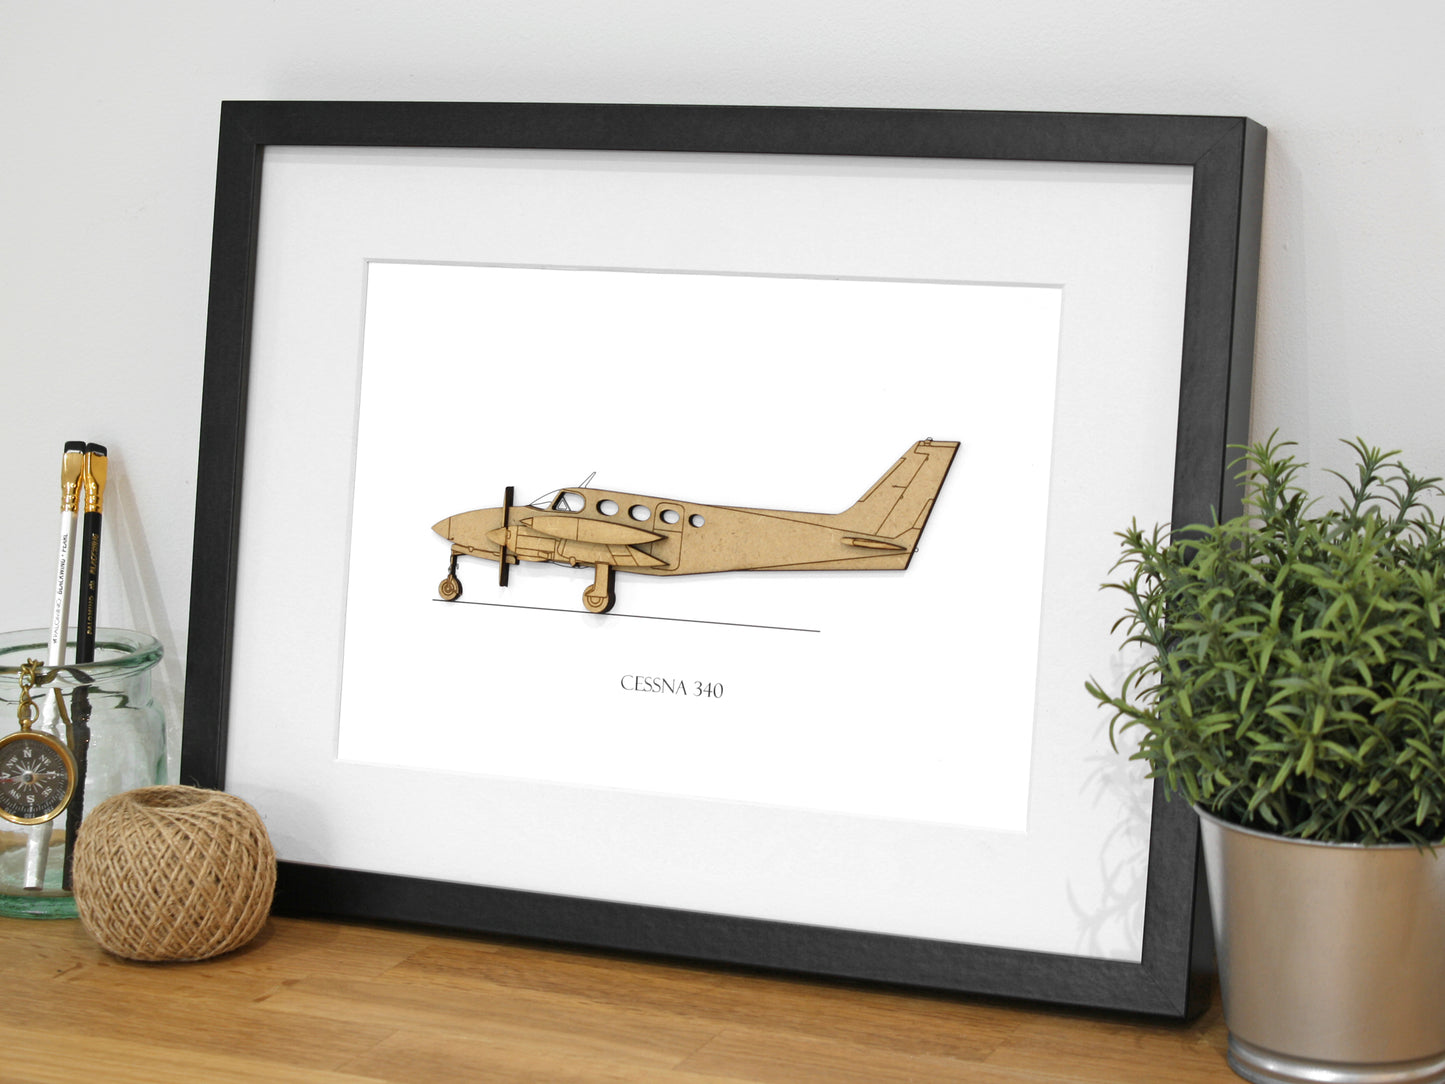 Cessna 340 aviation gifts